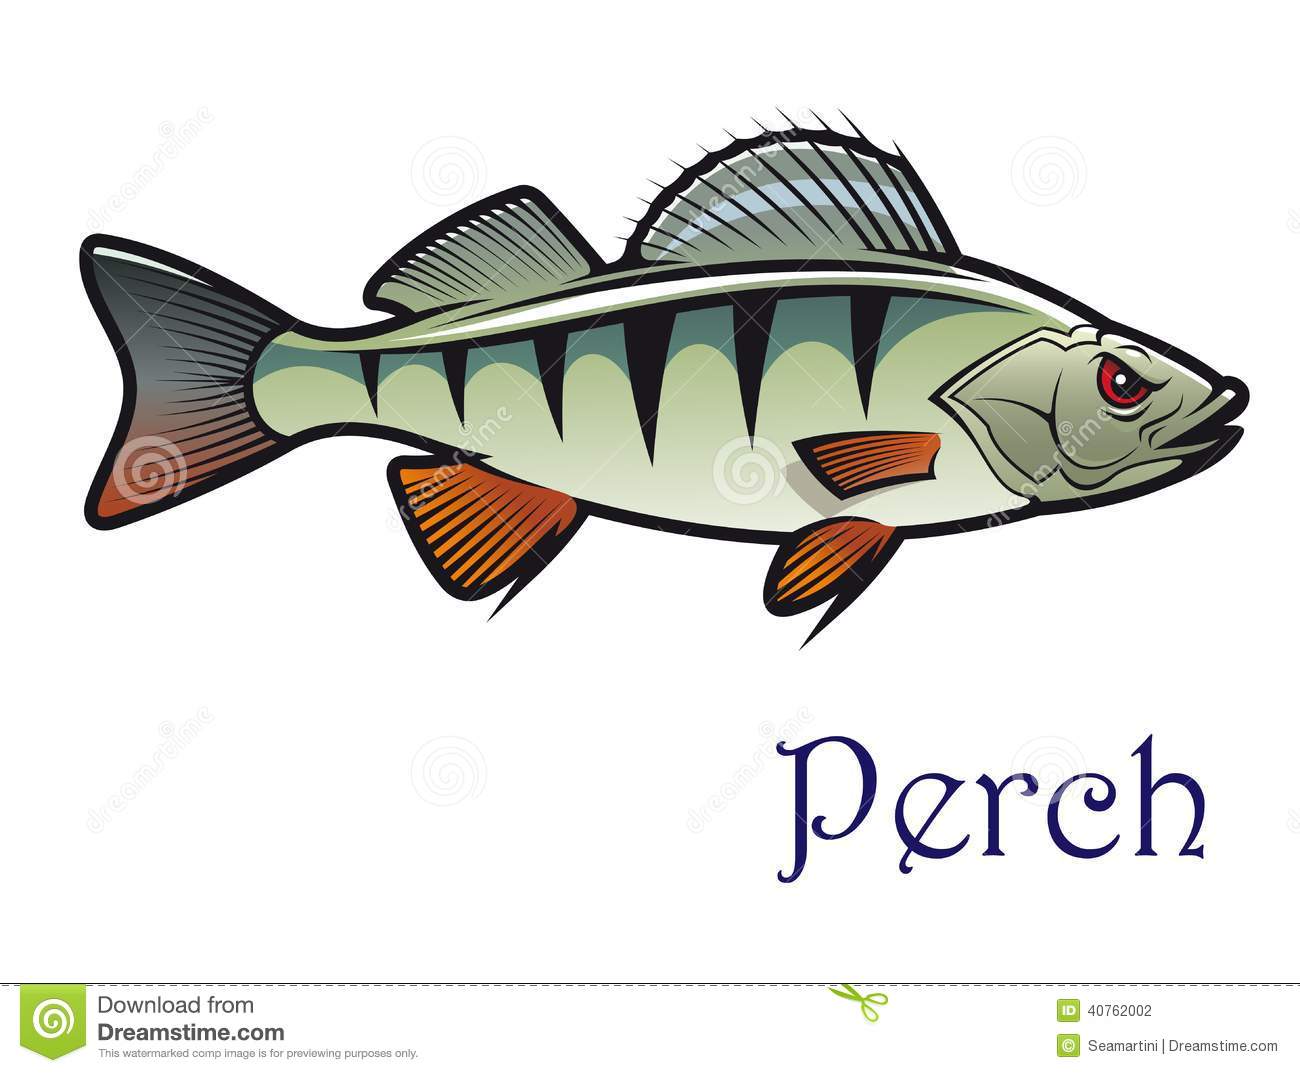 Showing post & media for Perch cartoon.